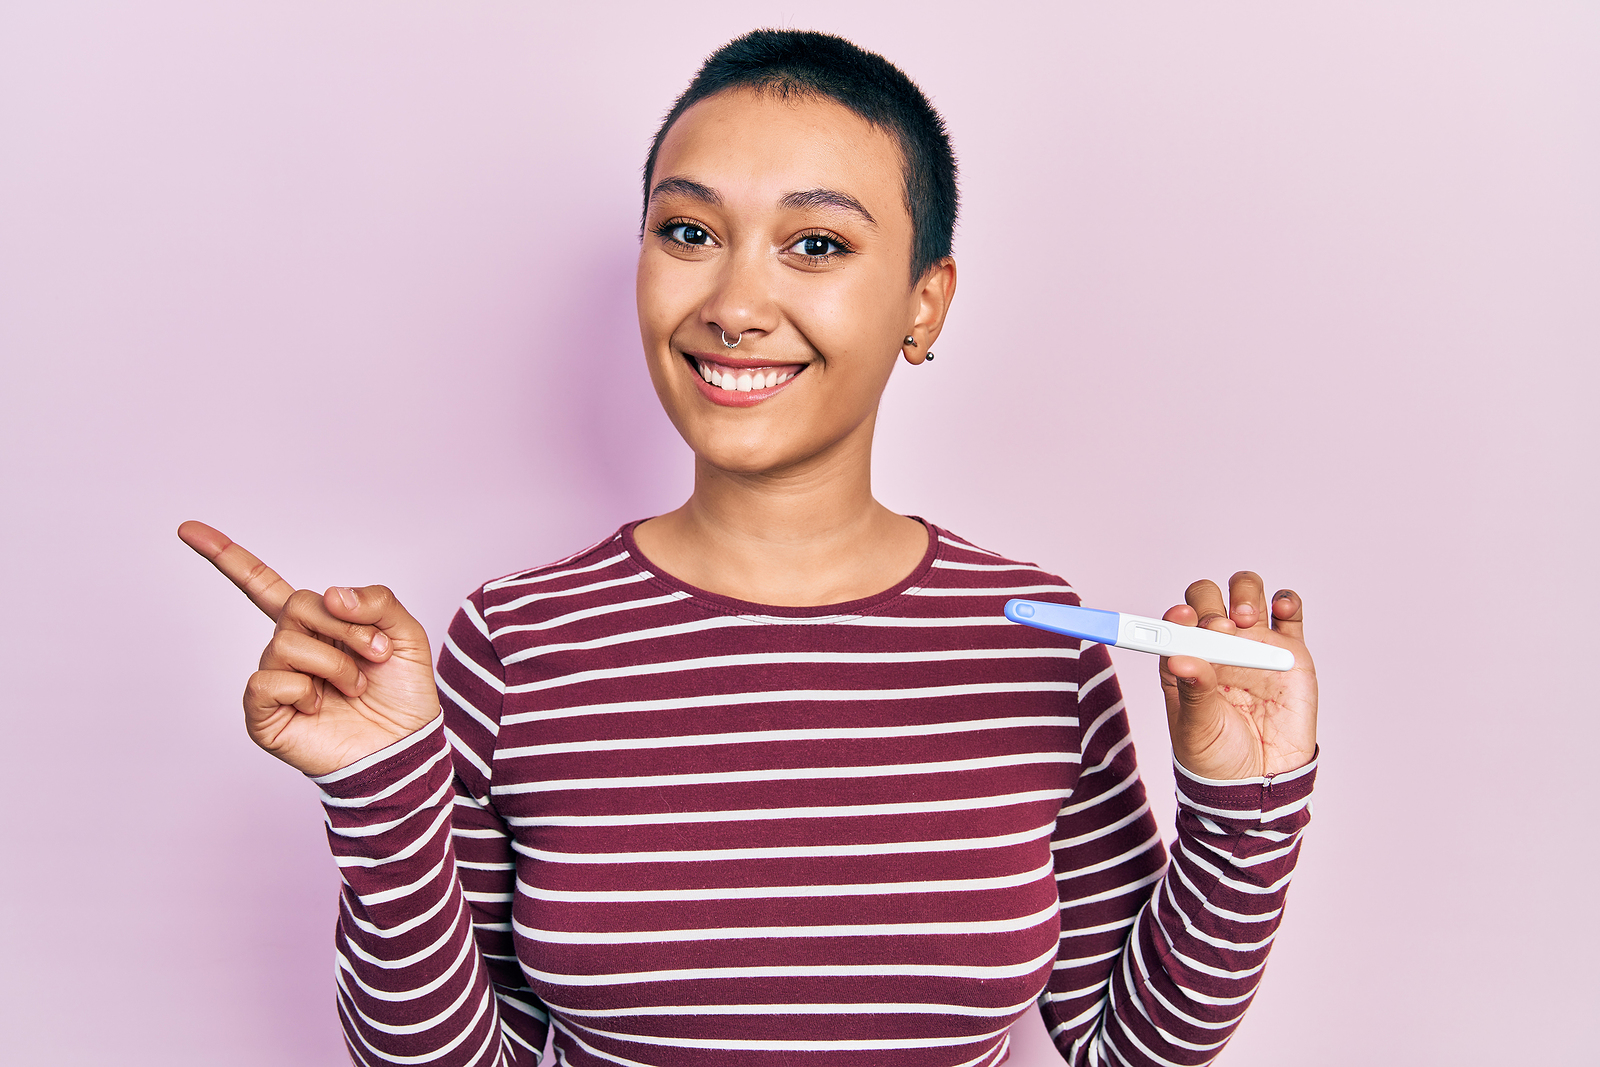 Beautiful hispanic woman with short hair holding pregnancy test result smiling happy pointing with hand and finger to the side